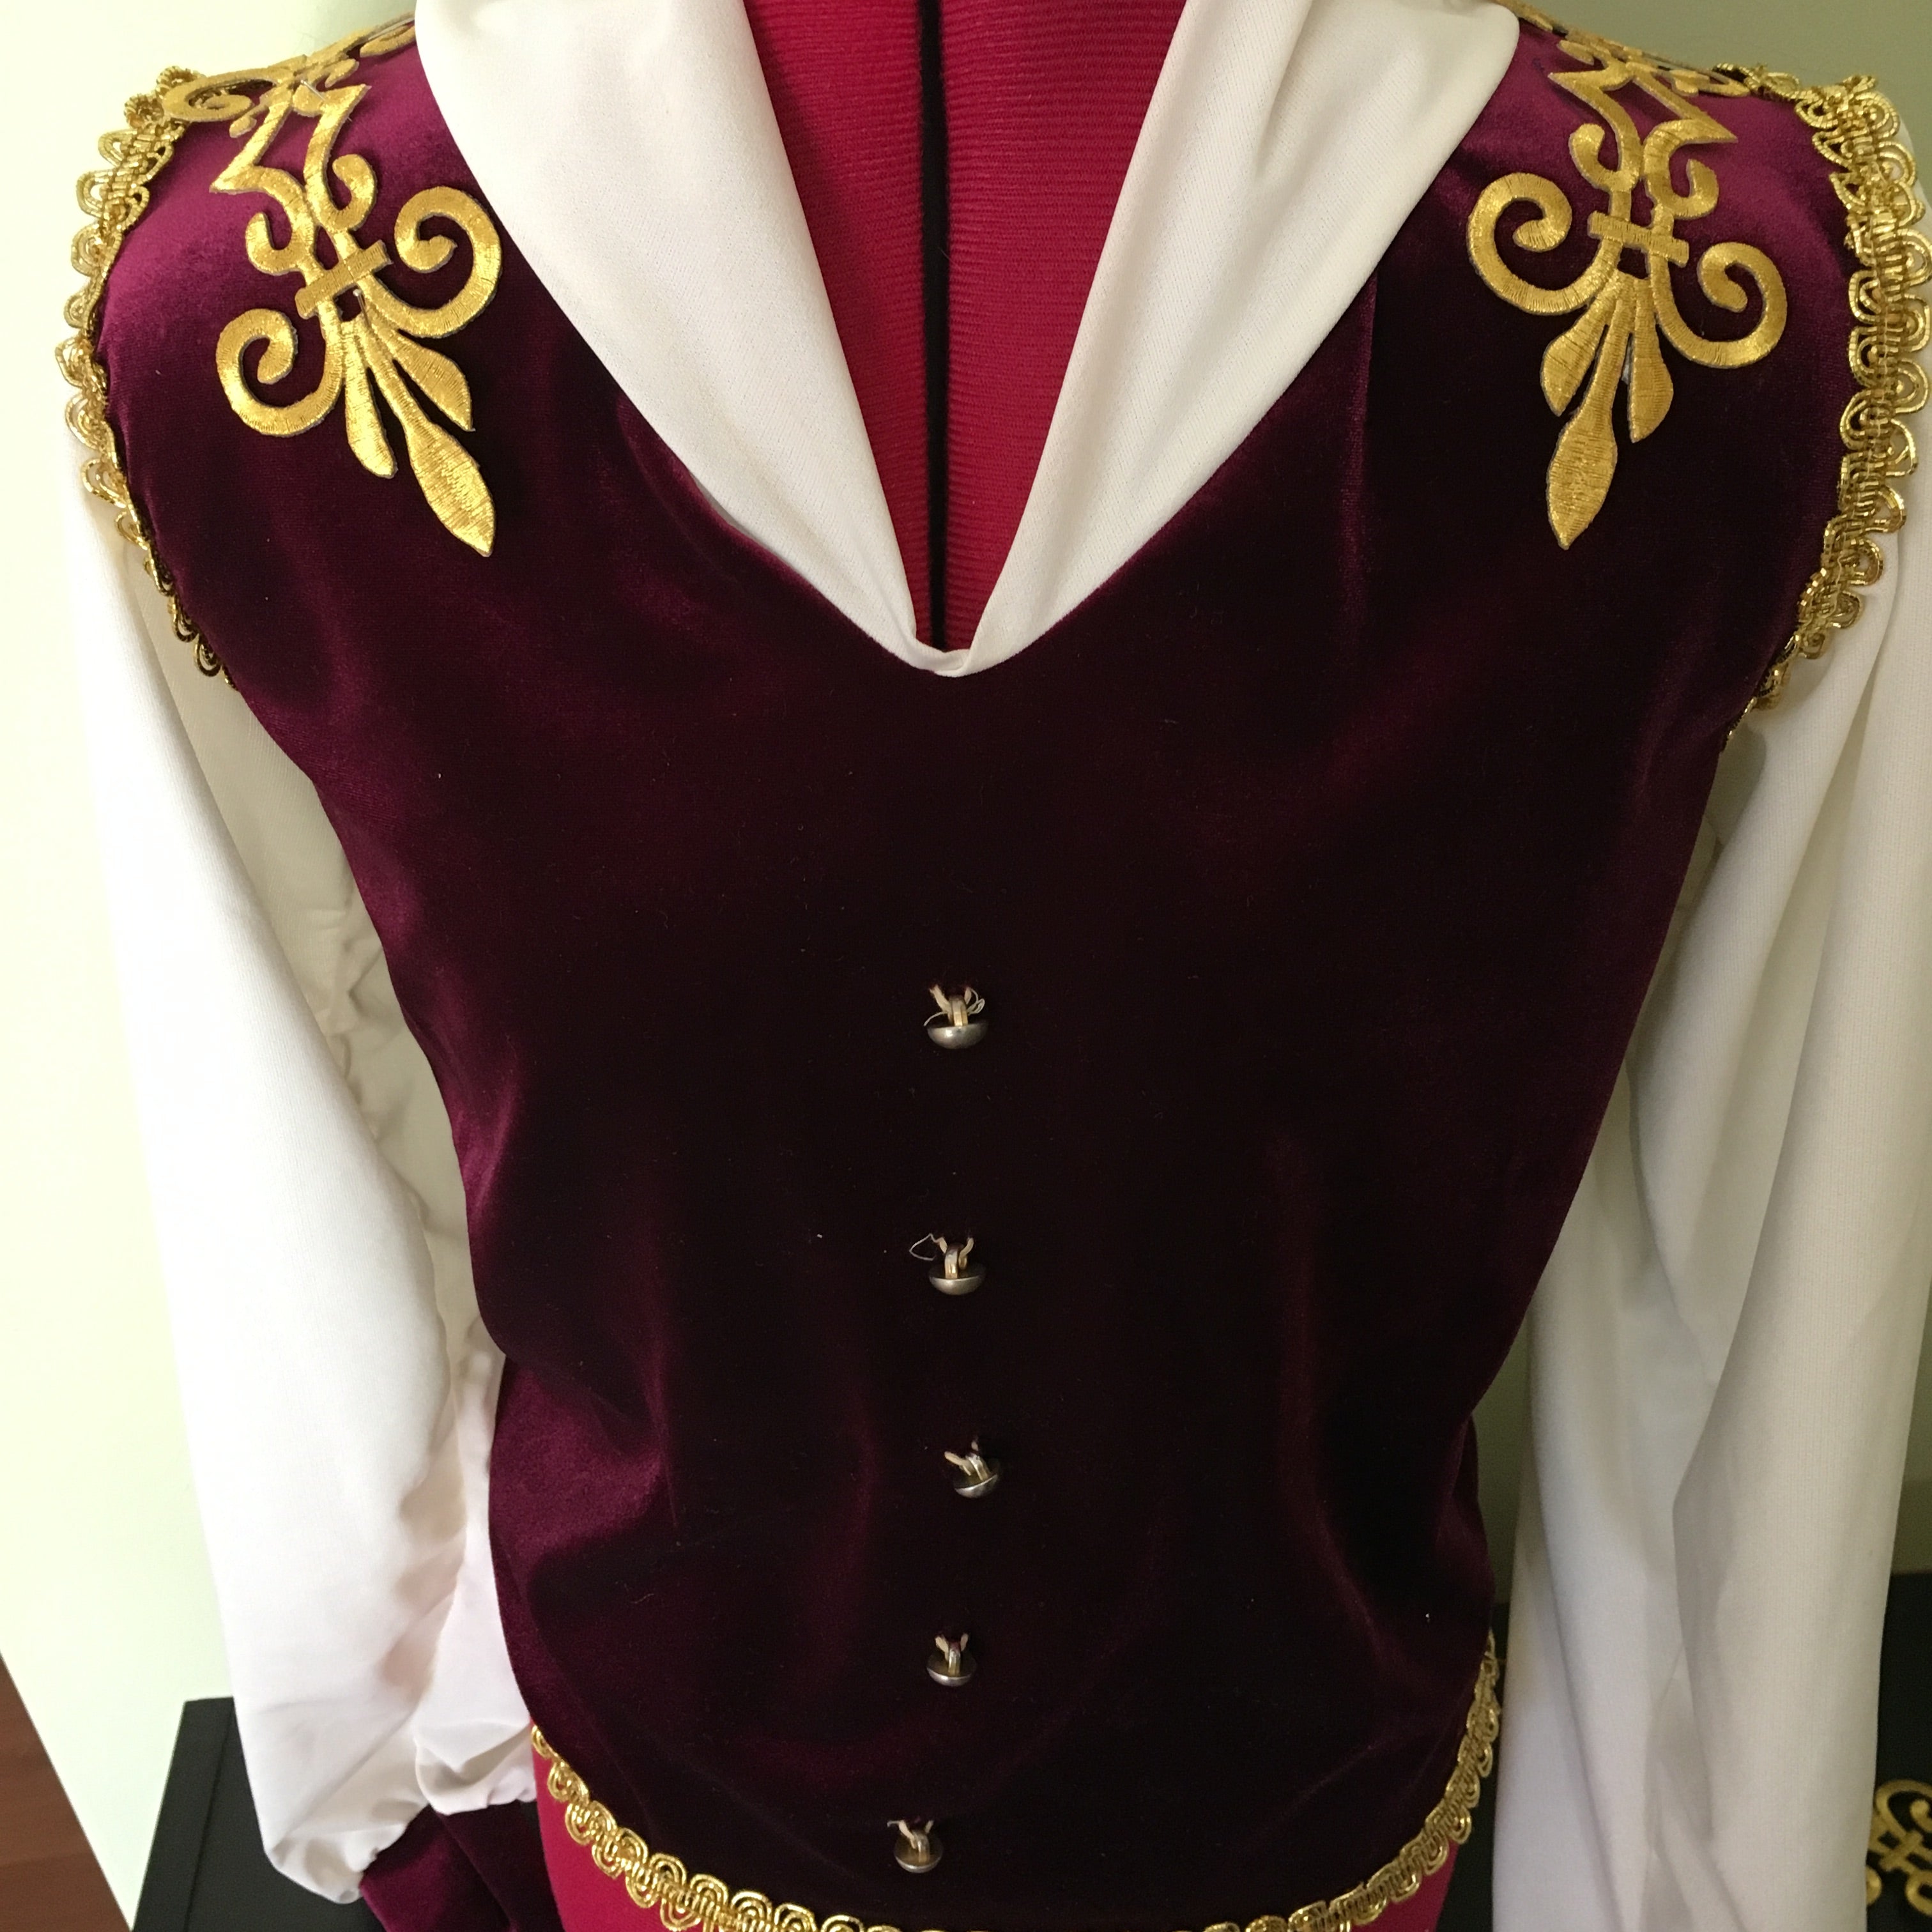 The gold embroidered baroque style appliques give the impression of epaulettes when placed across the shoulders of a boys military style costume 